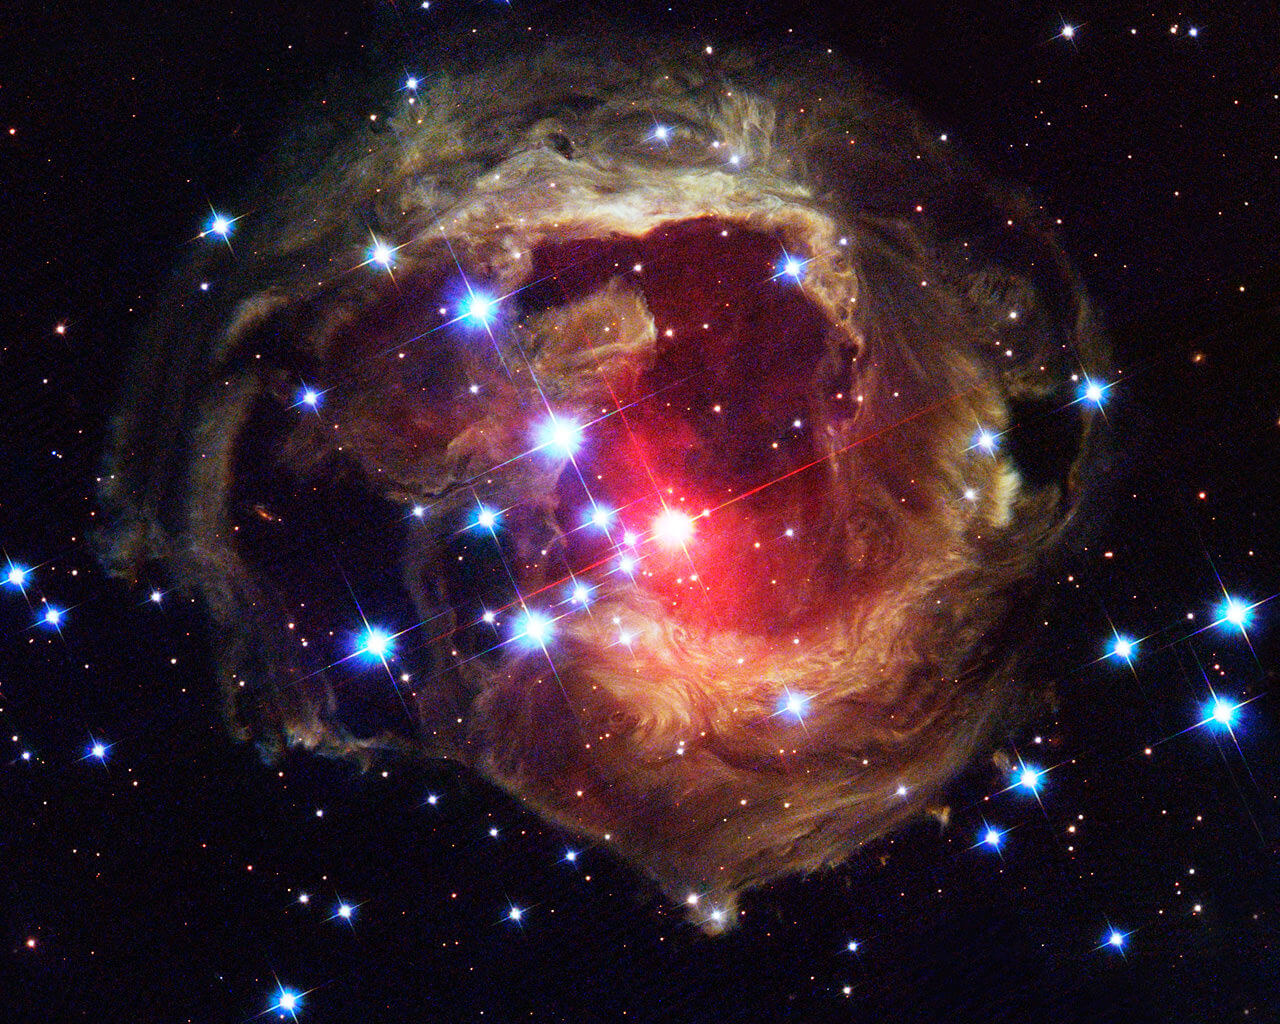 space is so cool - hubble pictures 12 (1)